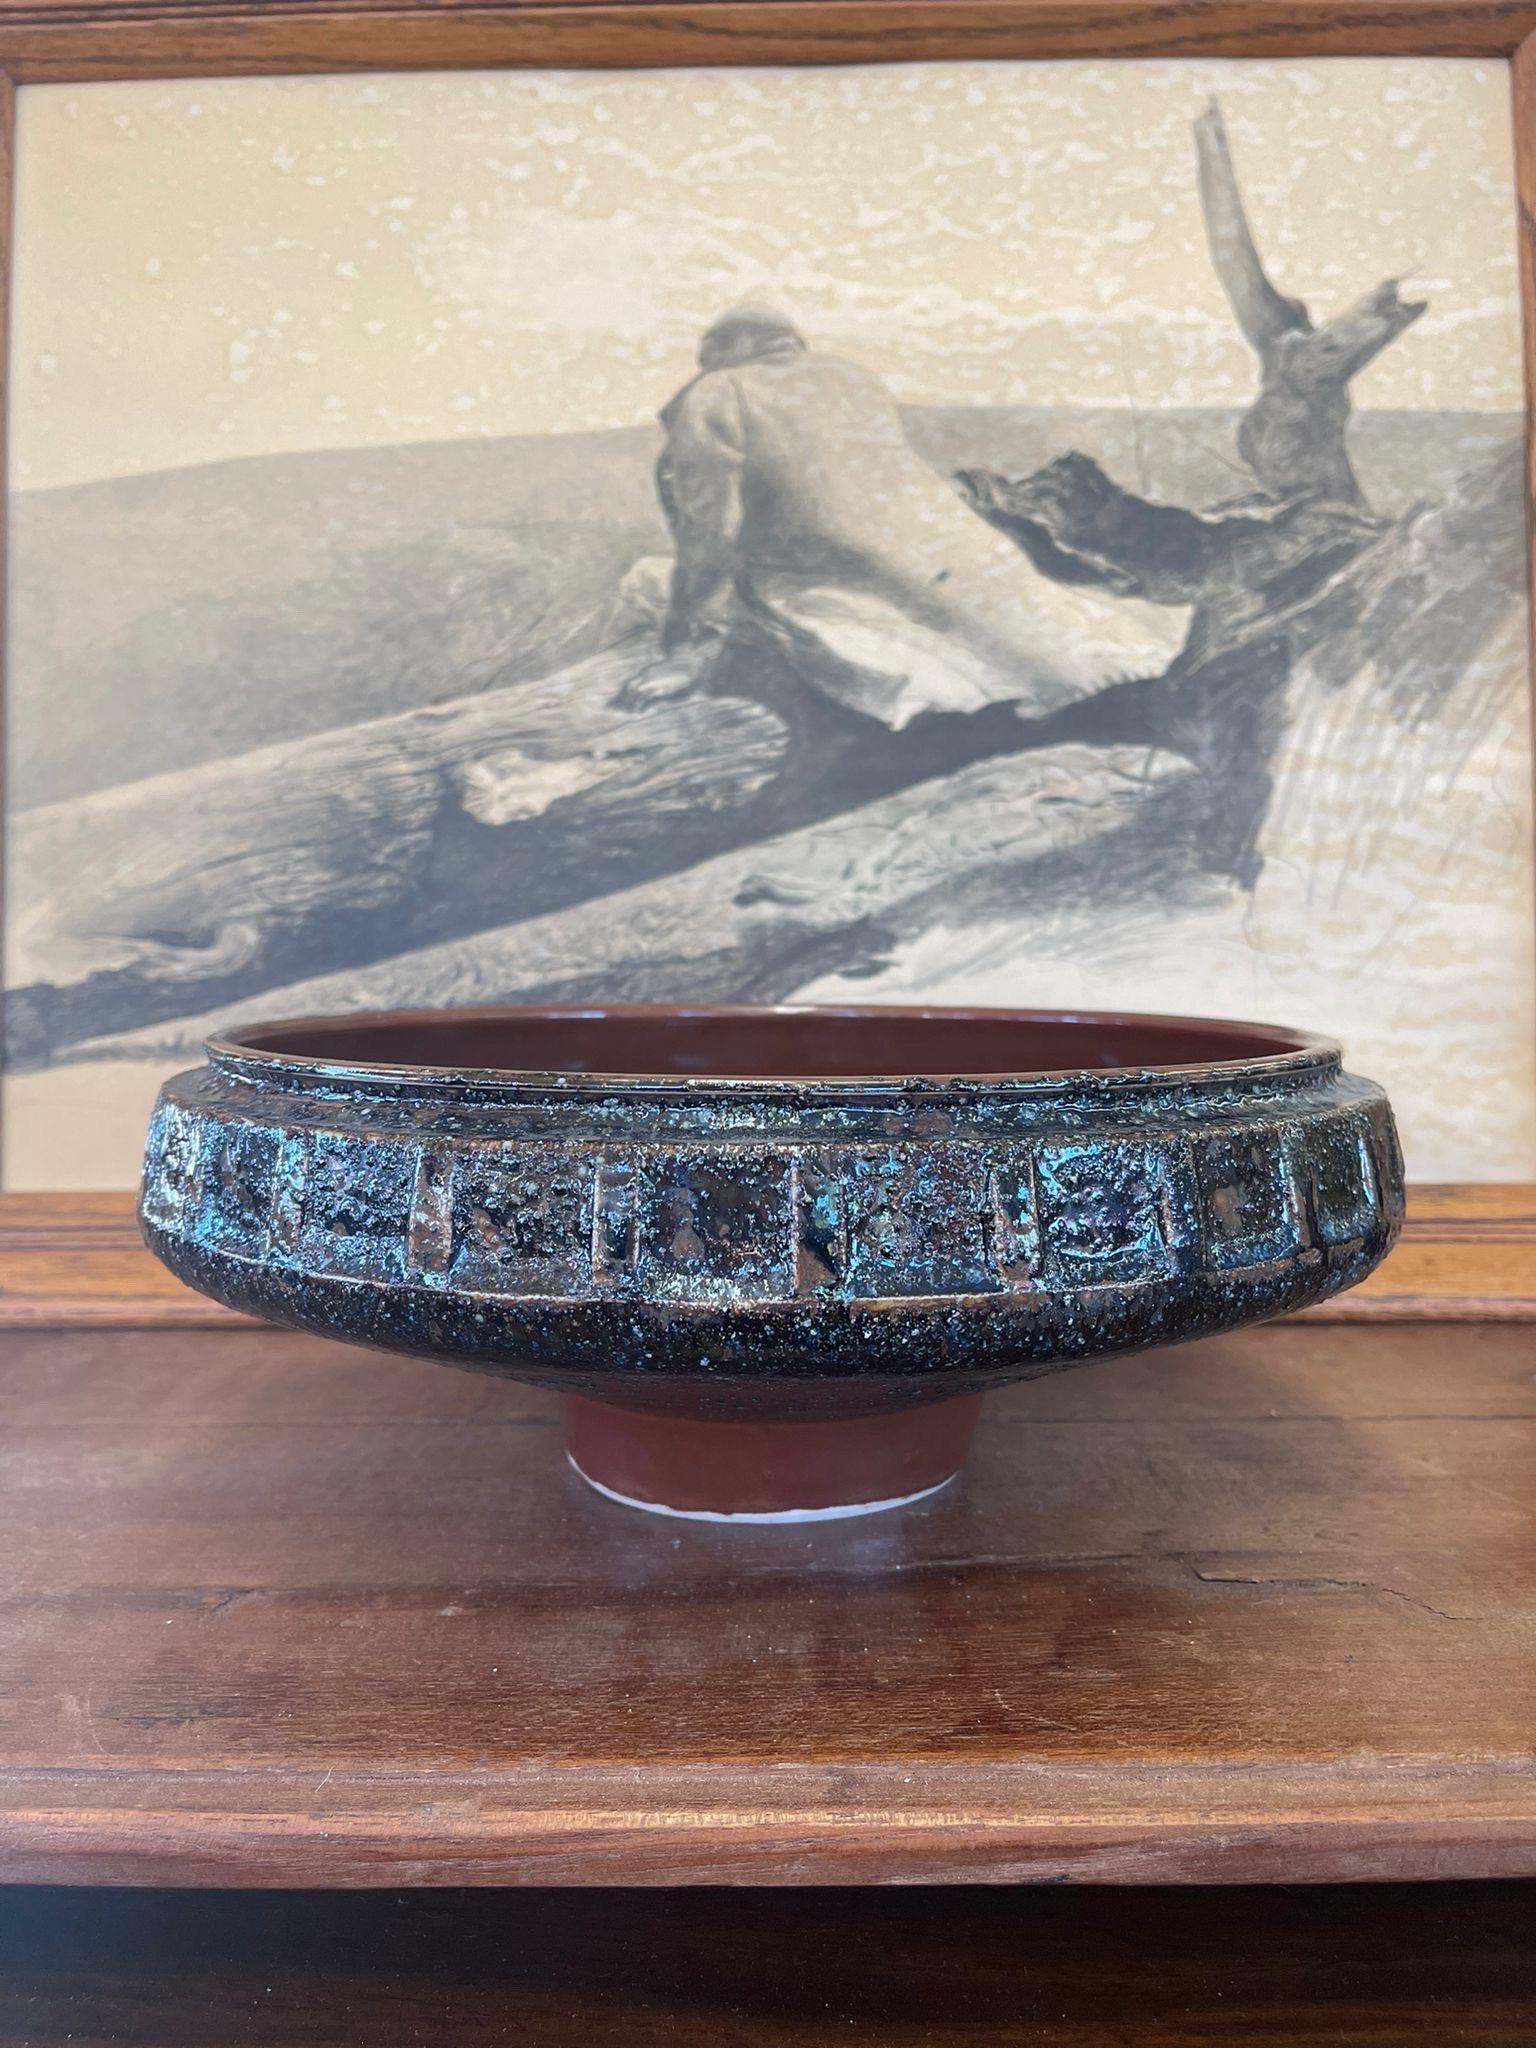 Vintage Ceramic Bowls with Brown and Black Glazing.
The Sides of the Bowl Feature Notched Details as Pictured.

Dimensions. 15 Diameter ; 5 H